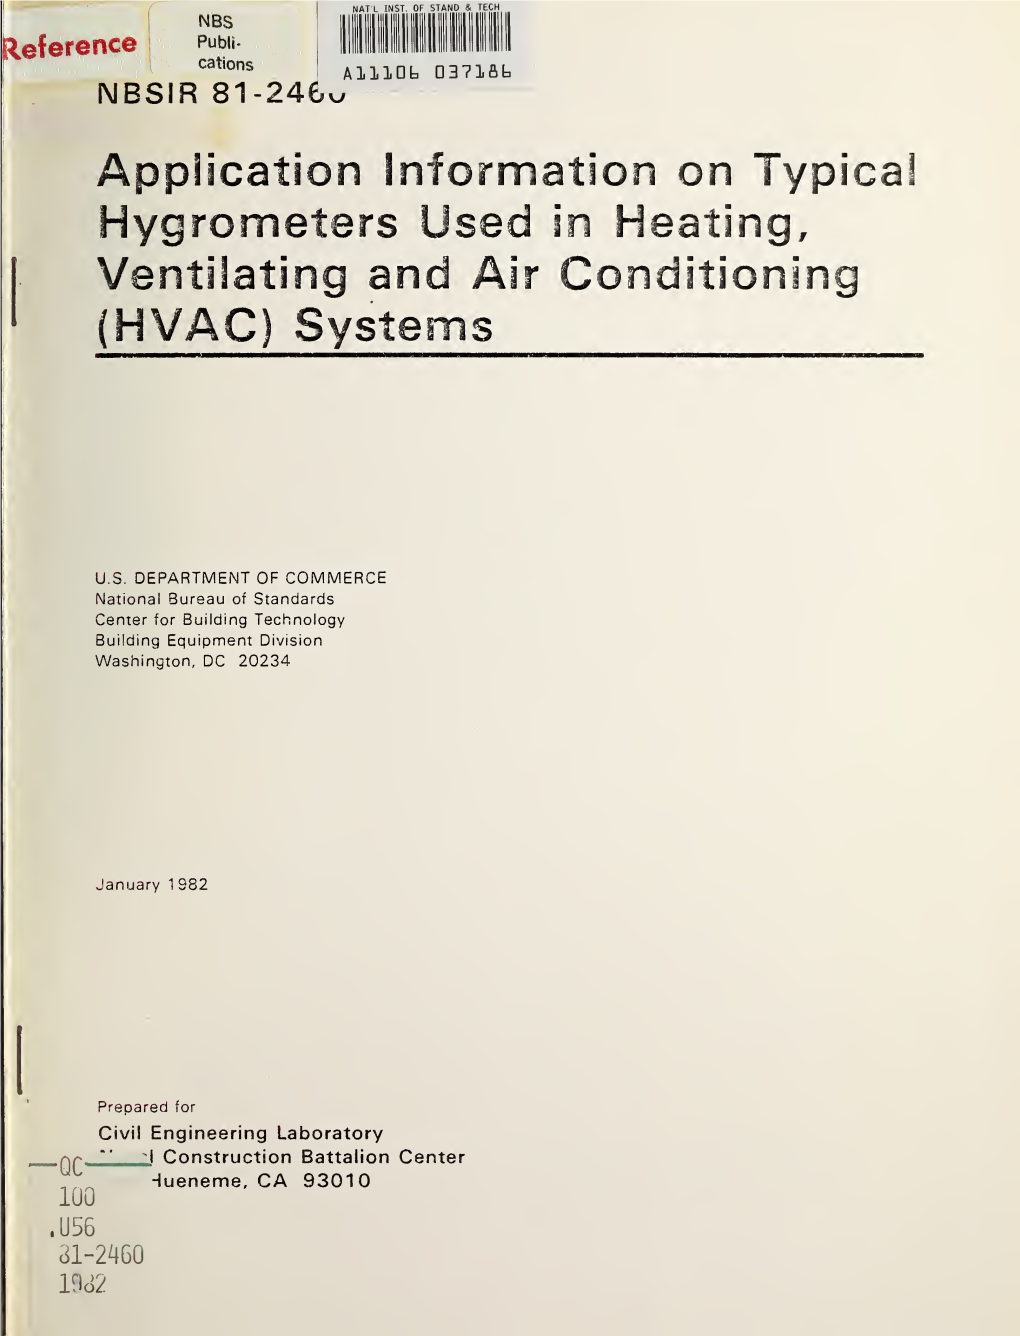 Application Information on Typical Hygrometers Used in Heating, Ventilating and Air Conditioning (HVAC) Systems